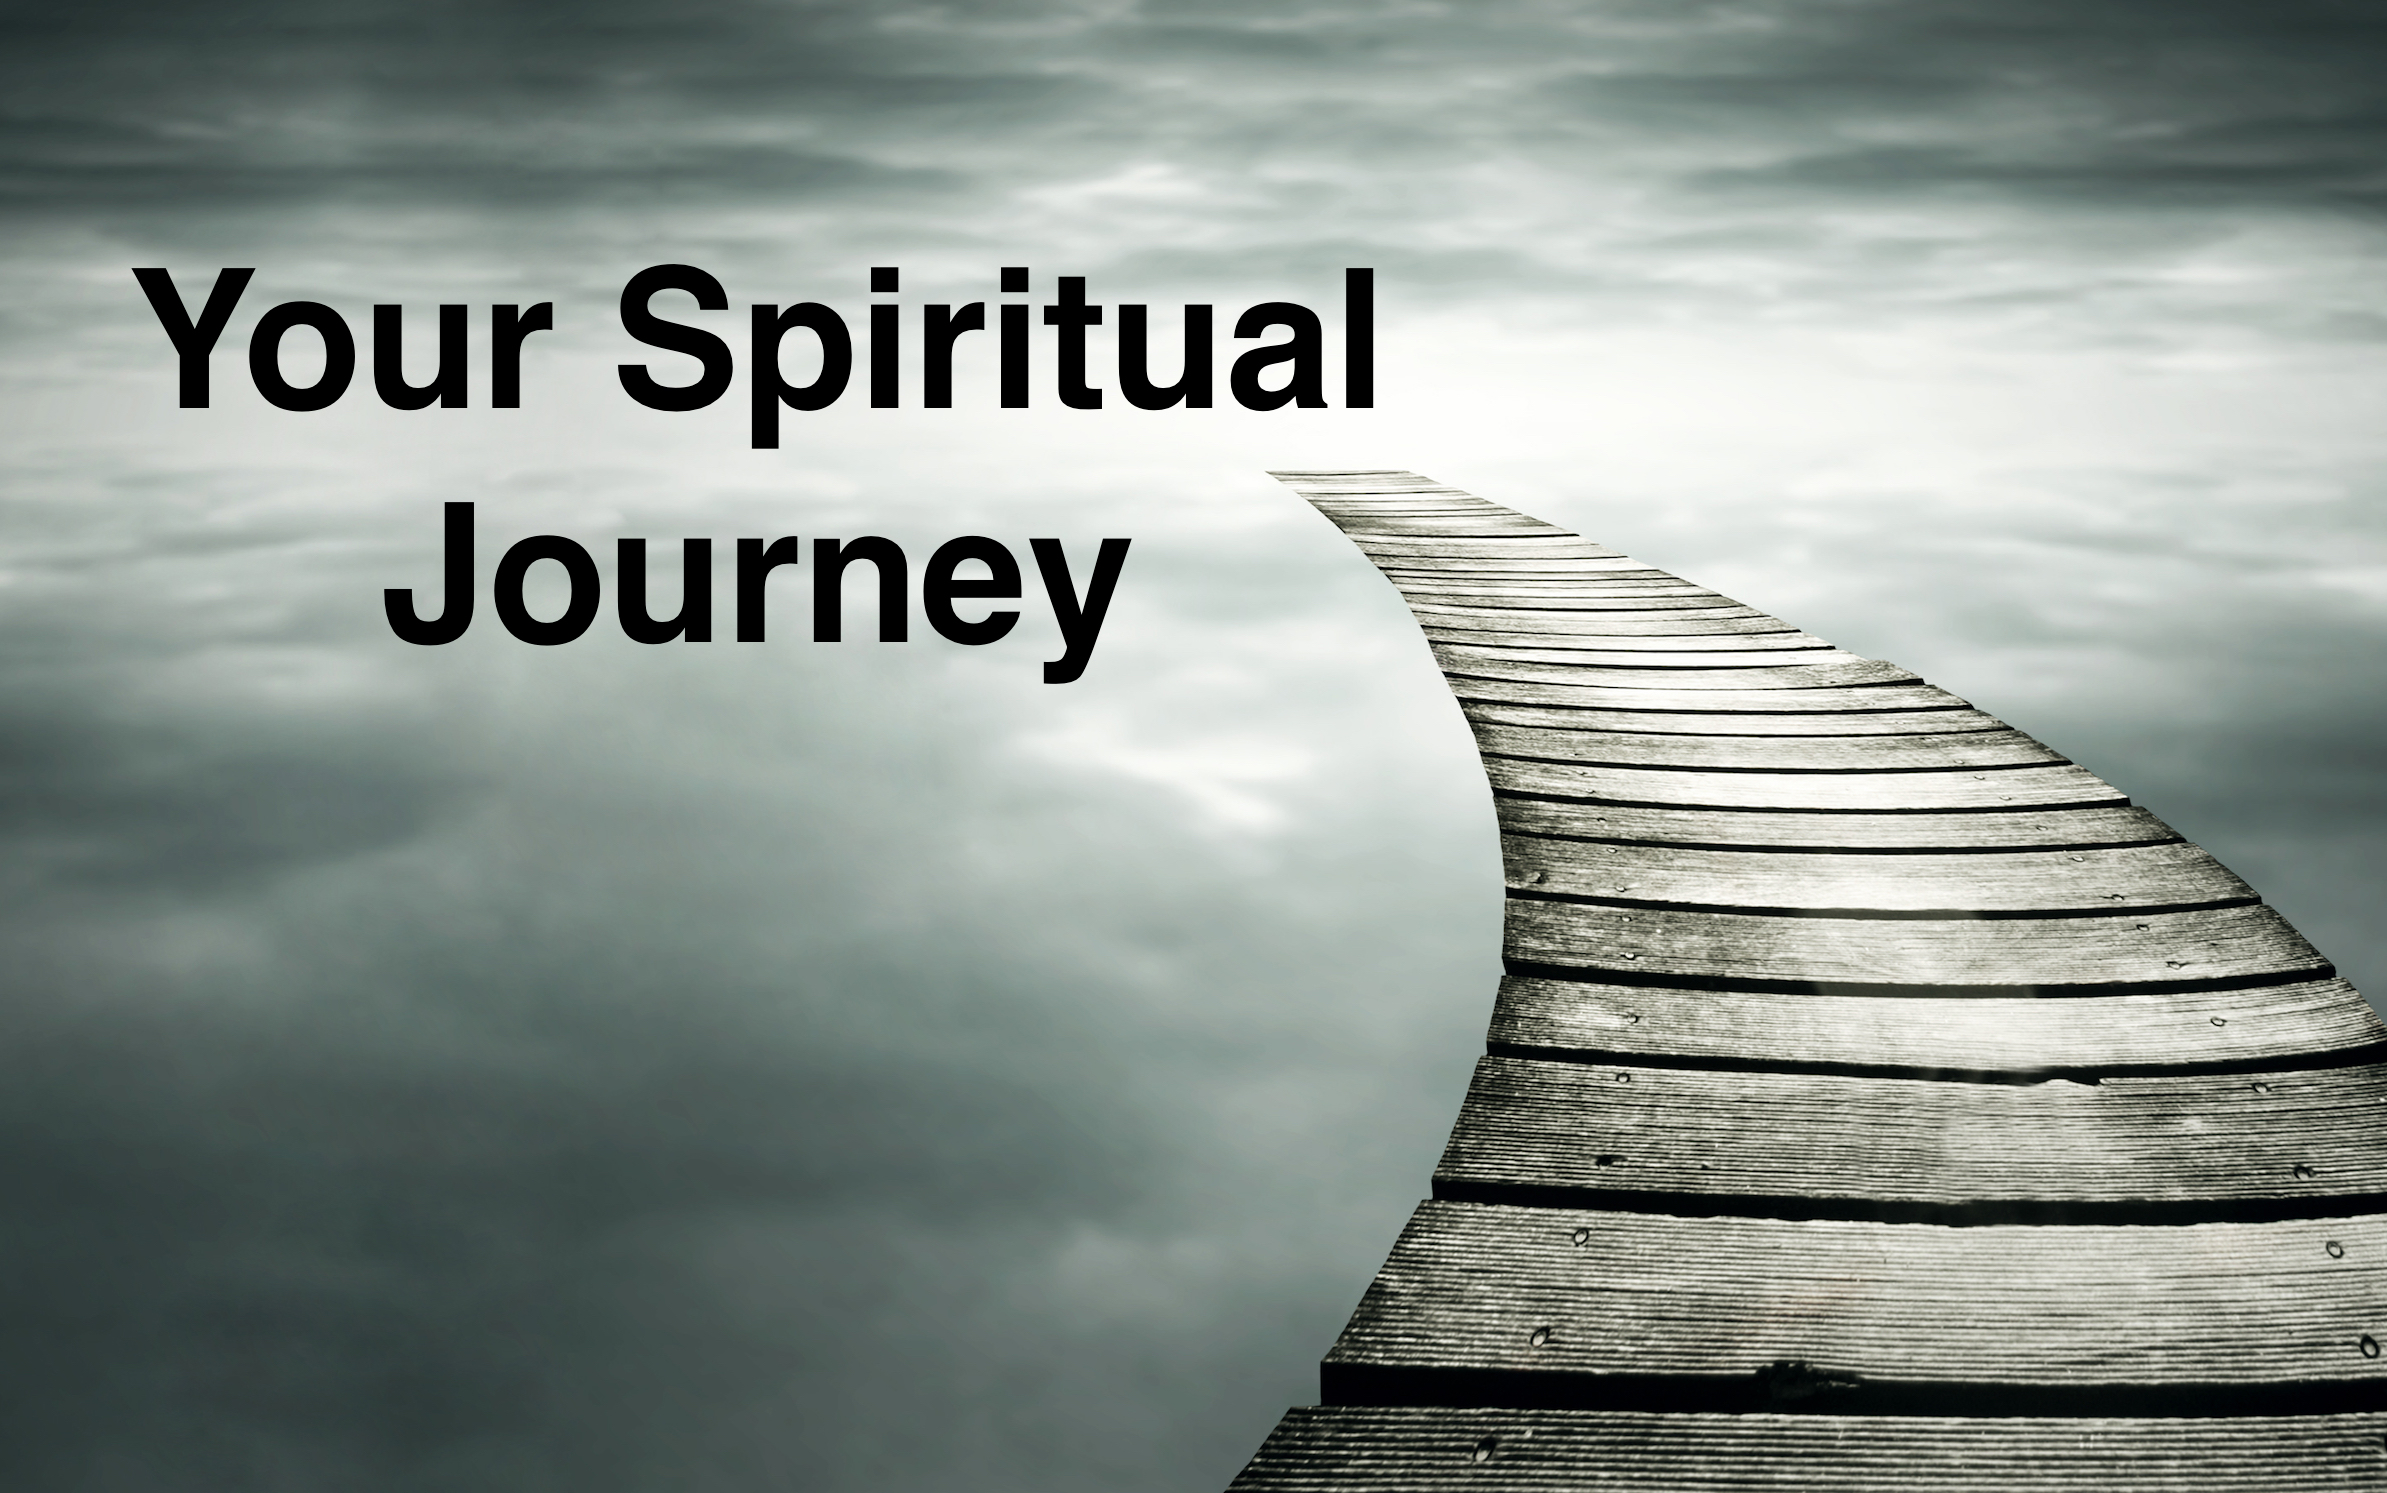 Your Journey, Your Journey Resources, Your Journey Resources Gary Rohrmayer